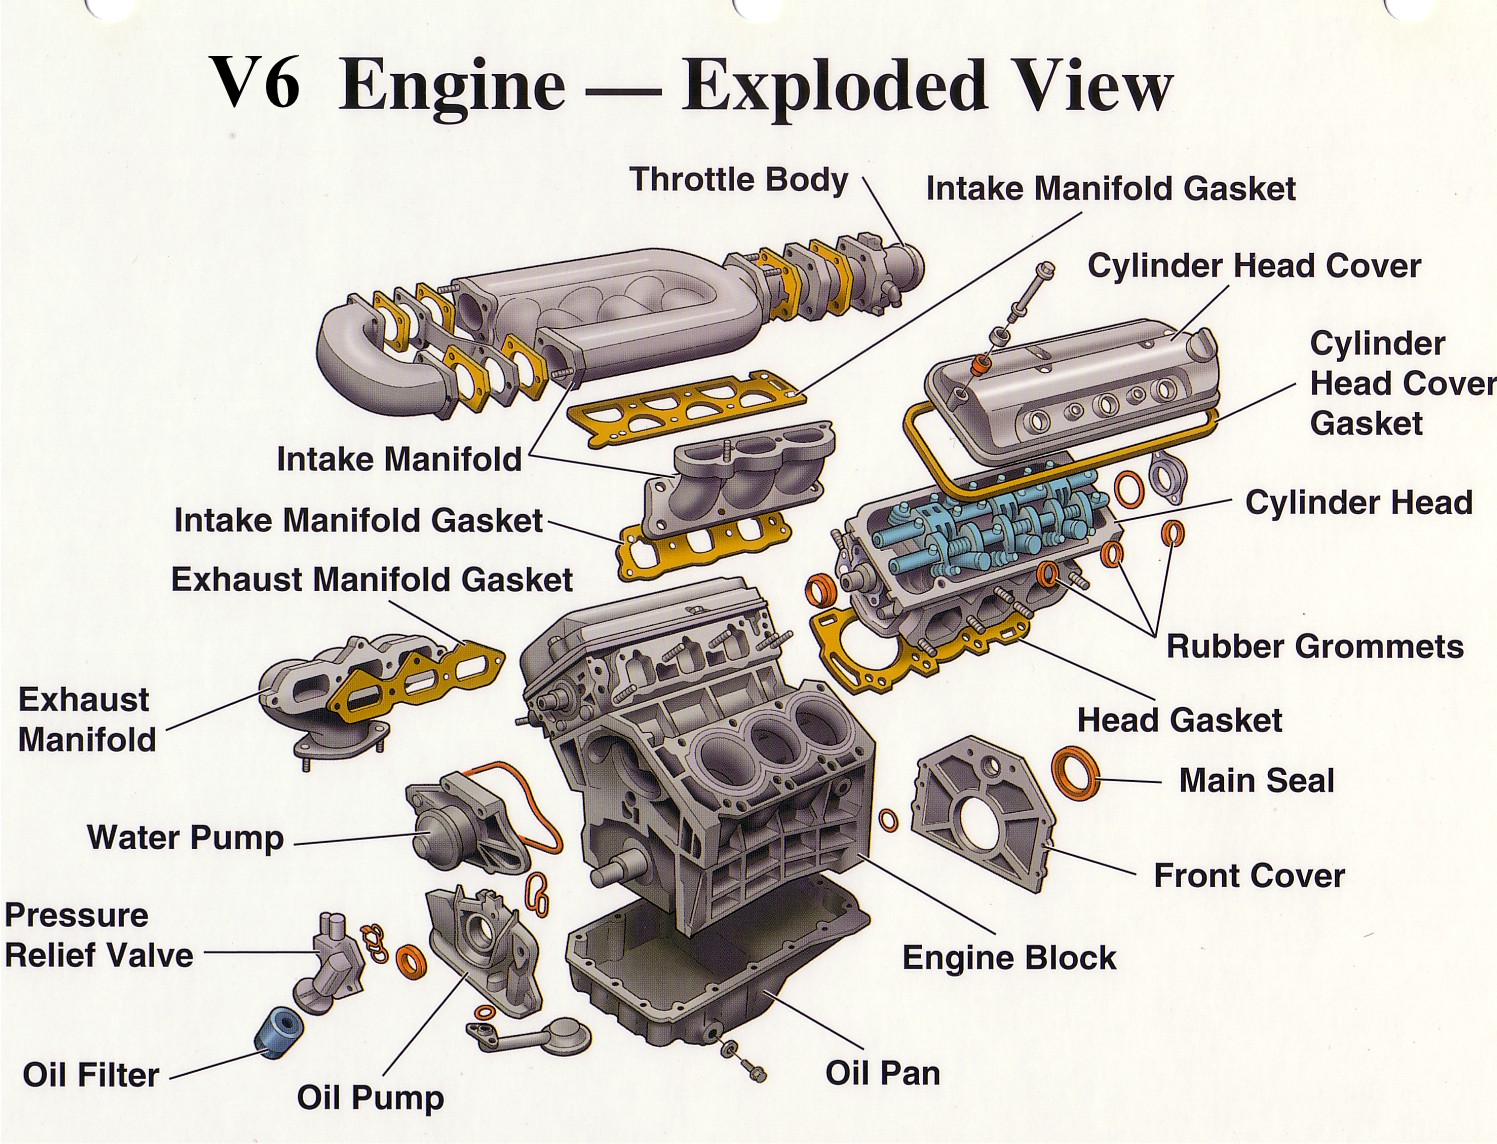 Engine Parts (Exploded View) - Electrical Blog